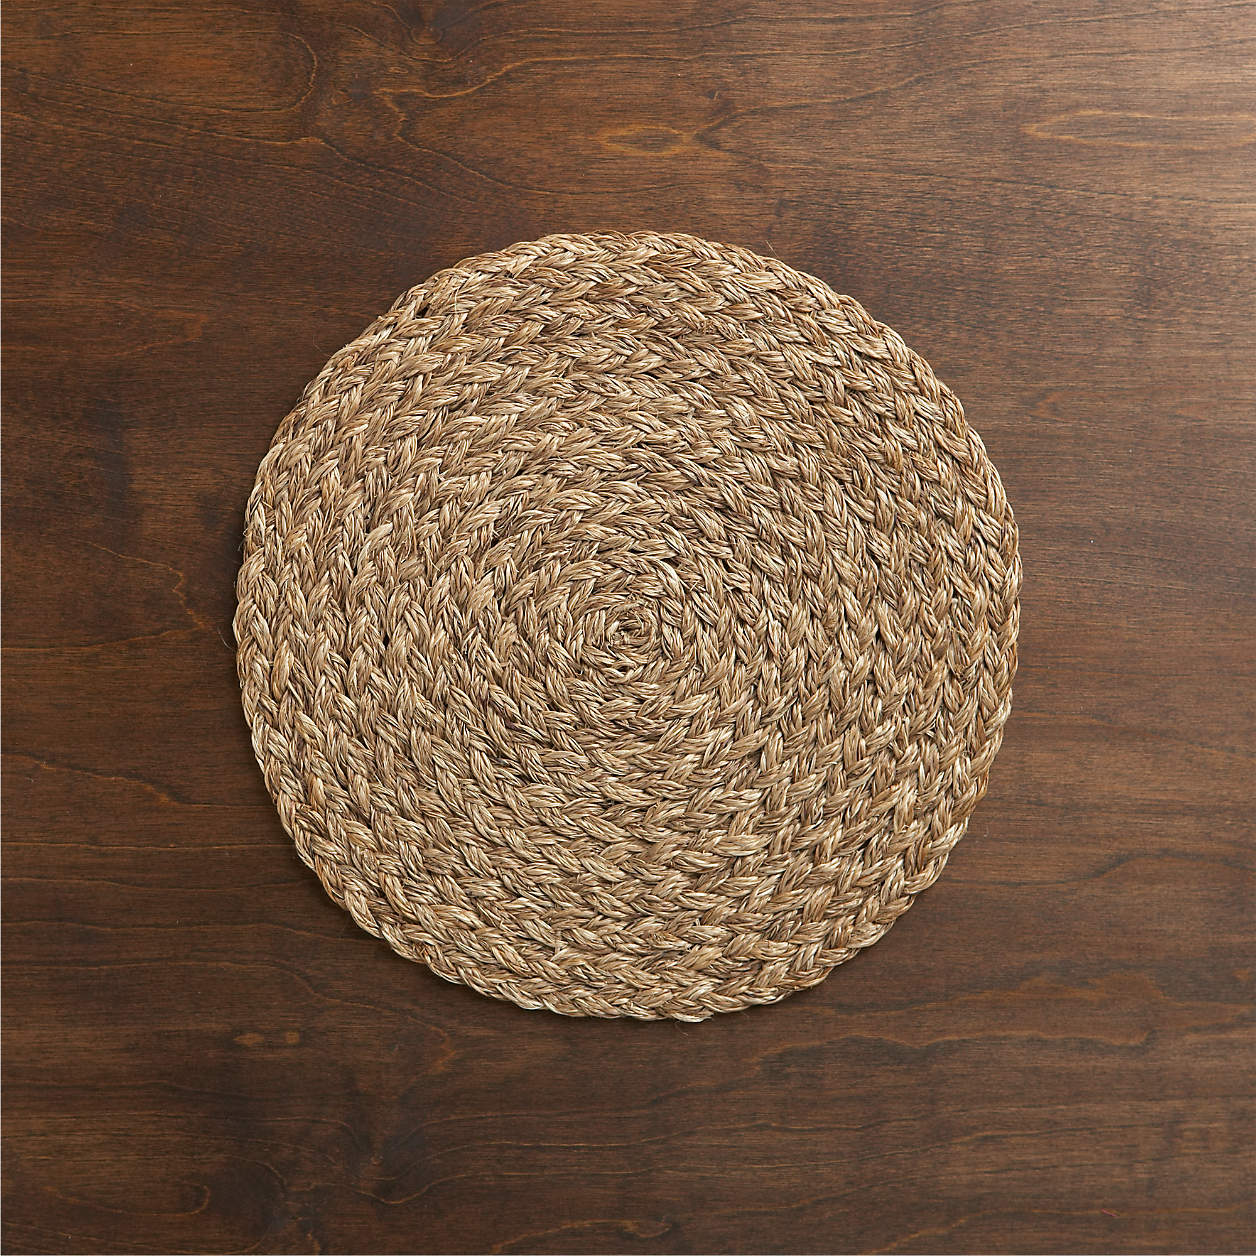 Bali Round Woven Placemat